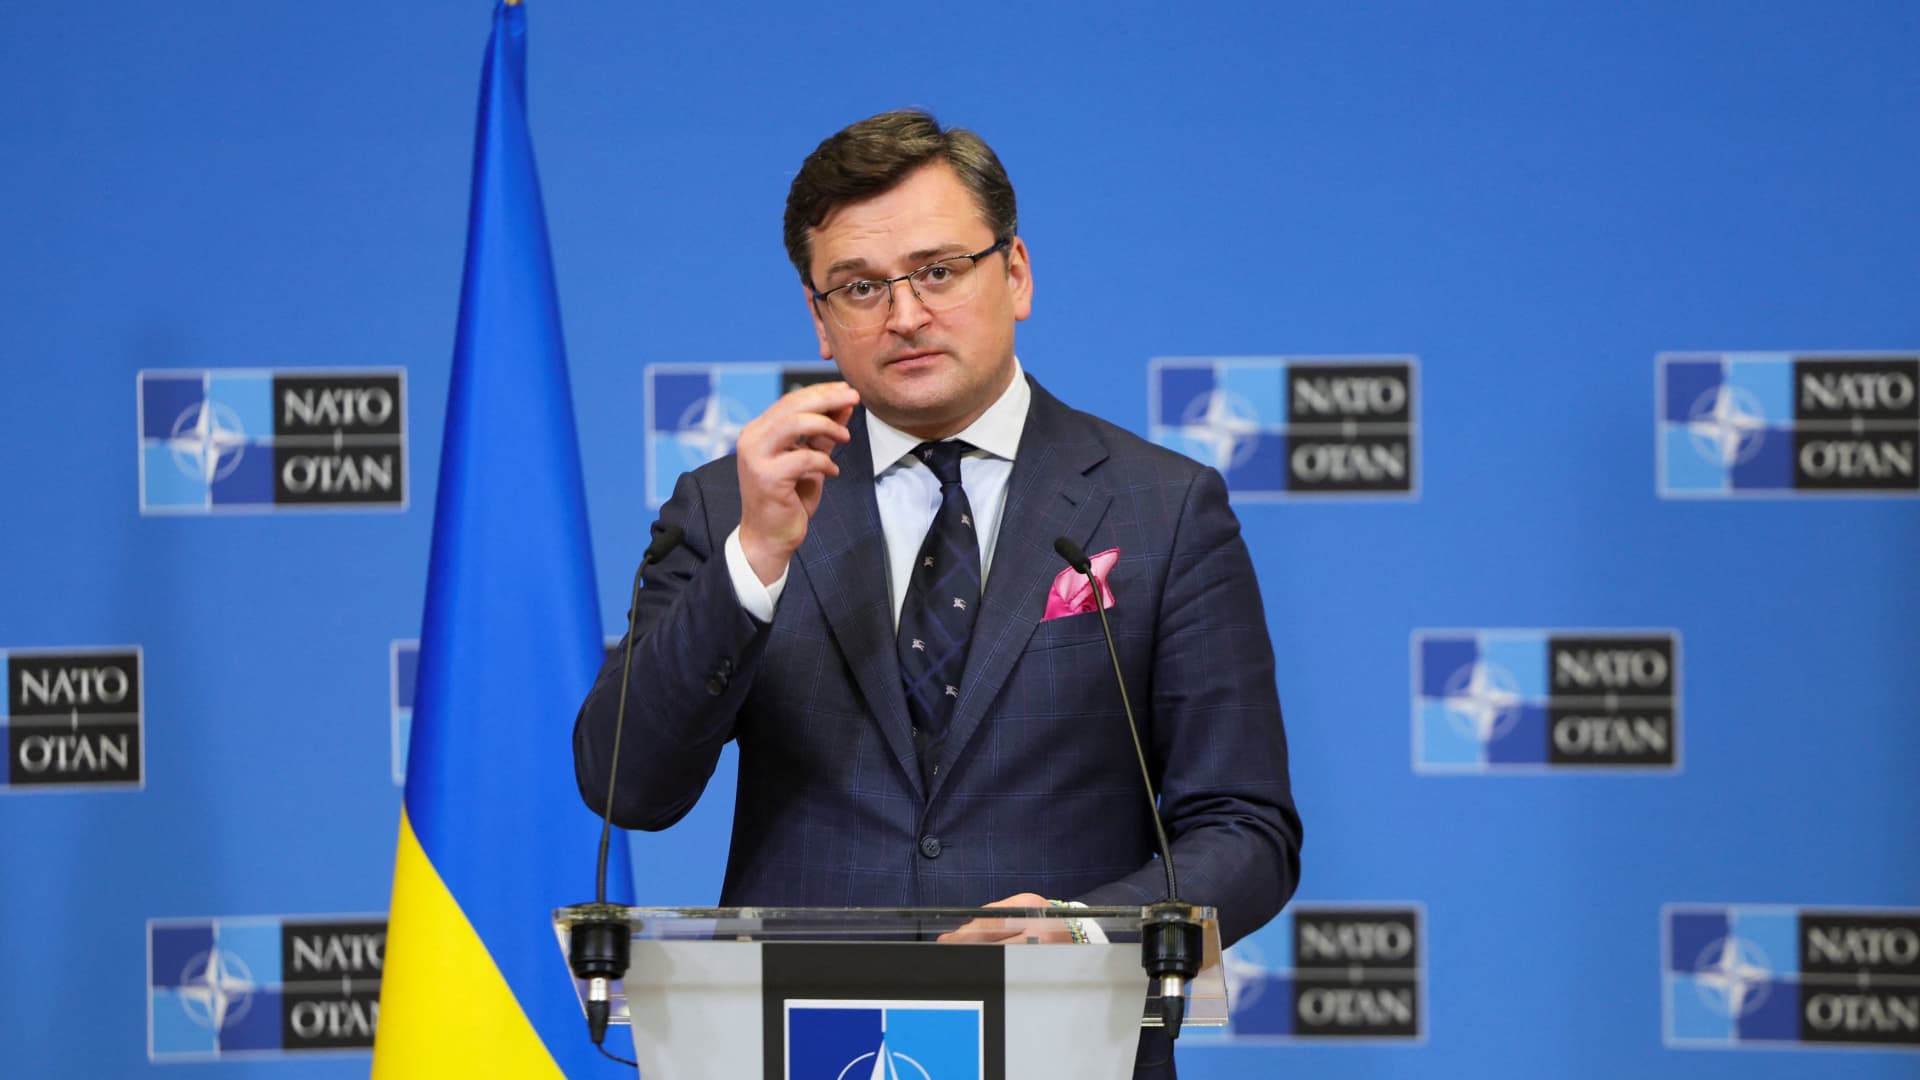 Ukrainian Foreign Minister Dmytro Kuleba speaks during a news conference, amid Russia's invasion of Ukraine, at NATO headquarters in Brussels, Belgium April 7, 2022. 